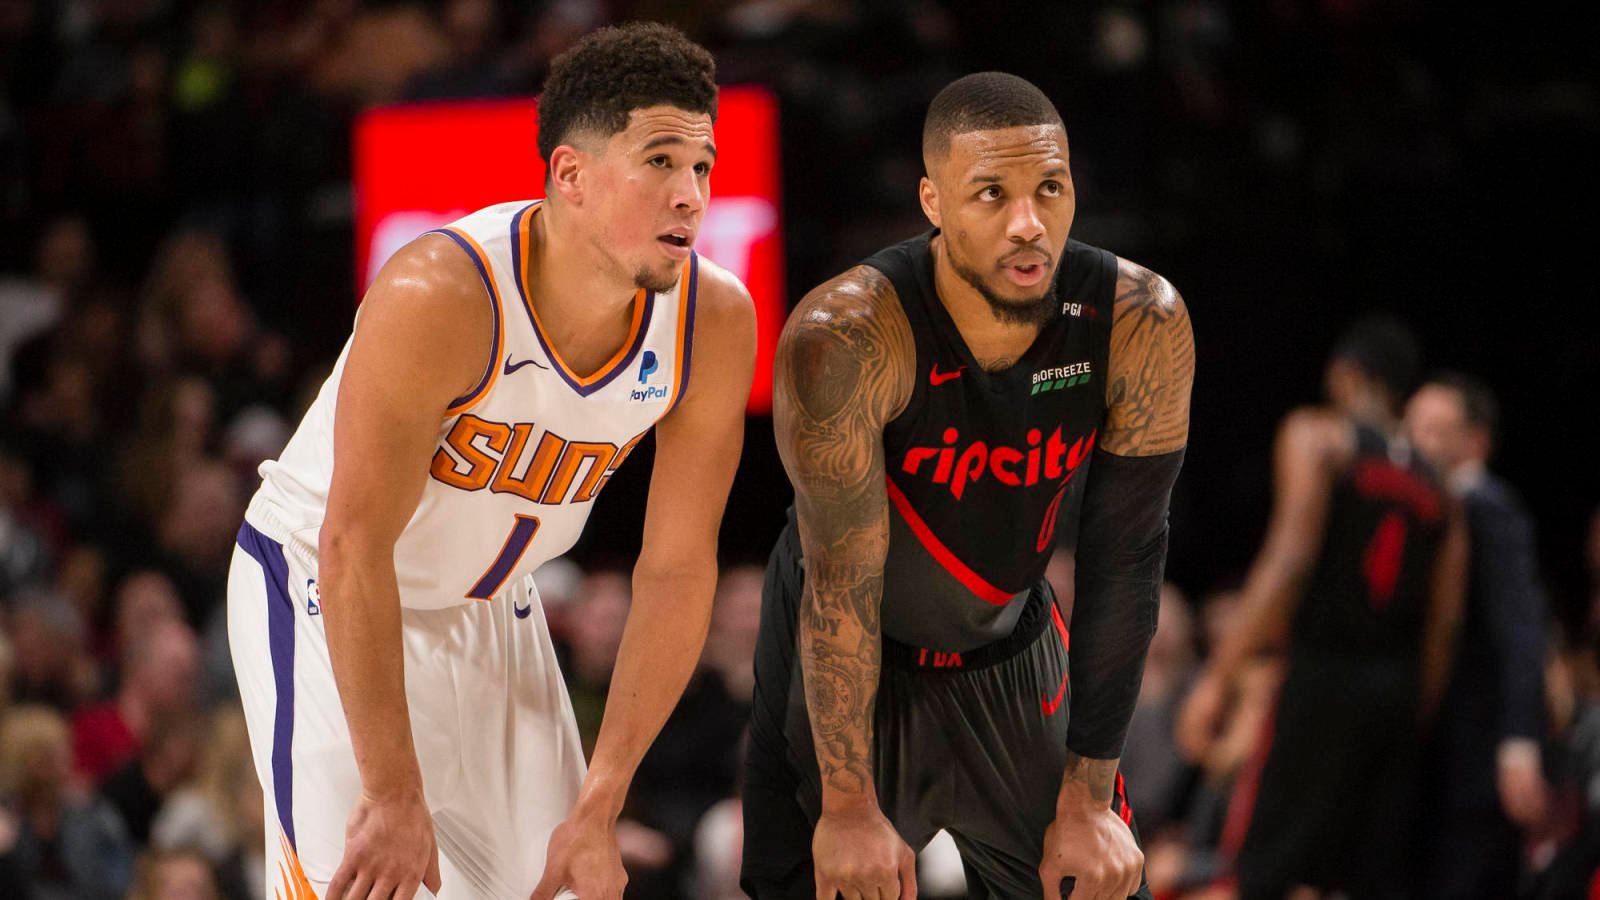 Mar 9, 2019; Portland, OR, USA; Phoenix Suns guard Devin Booker (1) and Portland Trail Blazers guard Damian Lillard (0) talk during a break in action during the second half at Moda Center. The Trail Blazers beat the Suns 127-120. Mandatory Credit: Troy Wayrynen-USA TODAY Sports